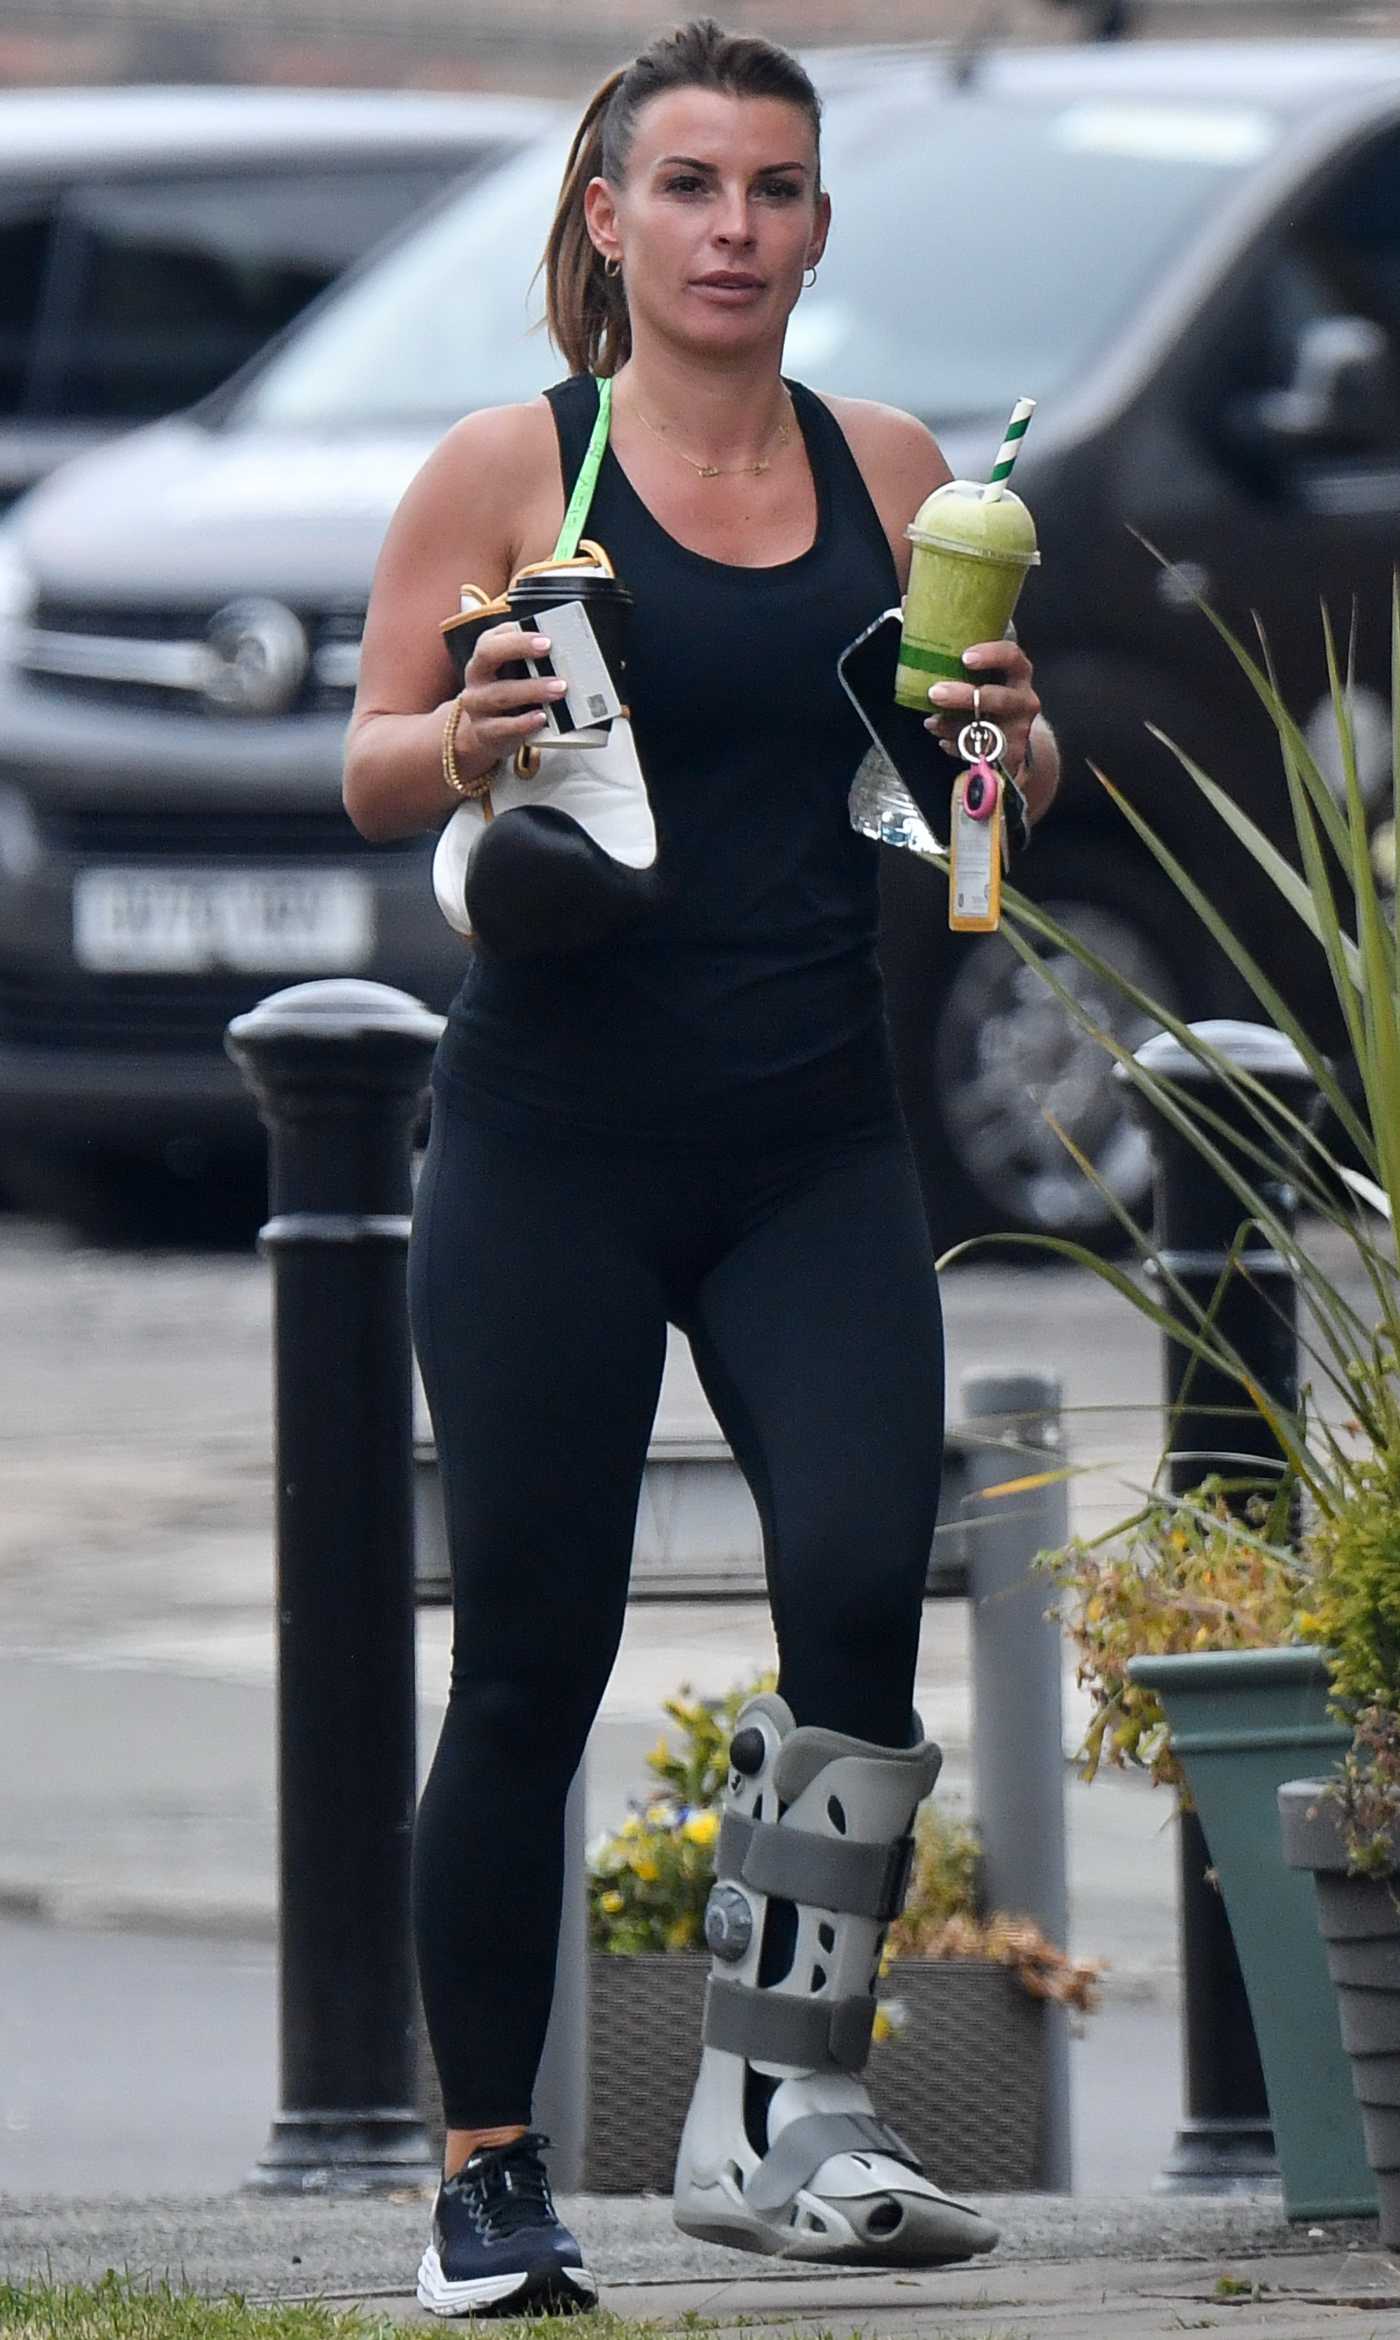 Coleen Rooney in a Black Tank Top Leaves Her Boxing Session in Cheshire 07/12/2022